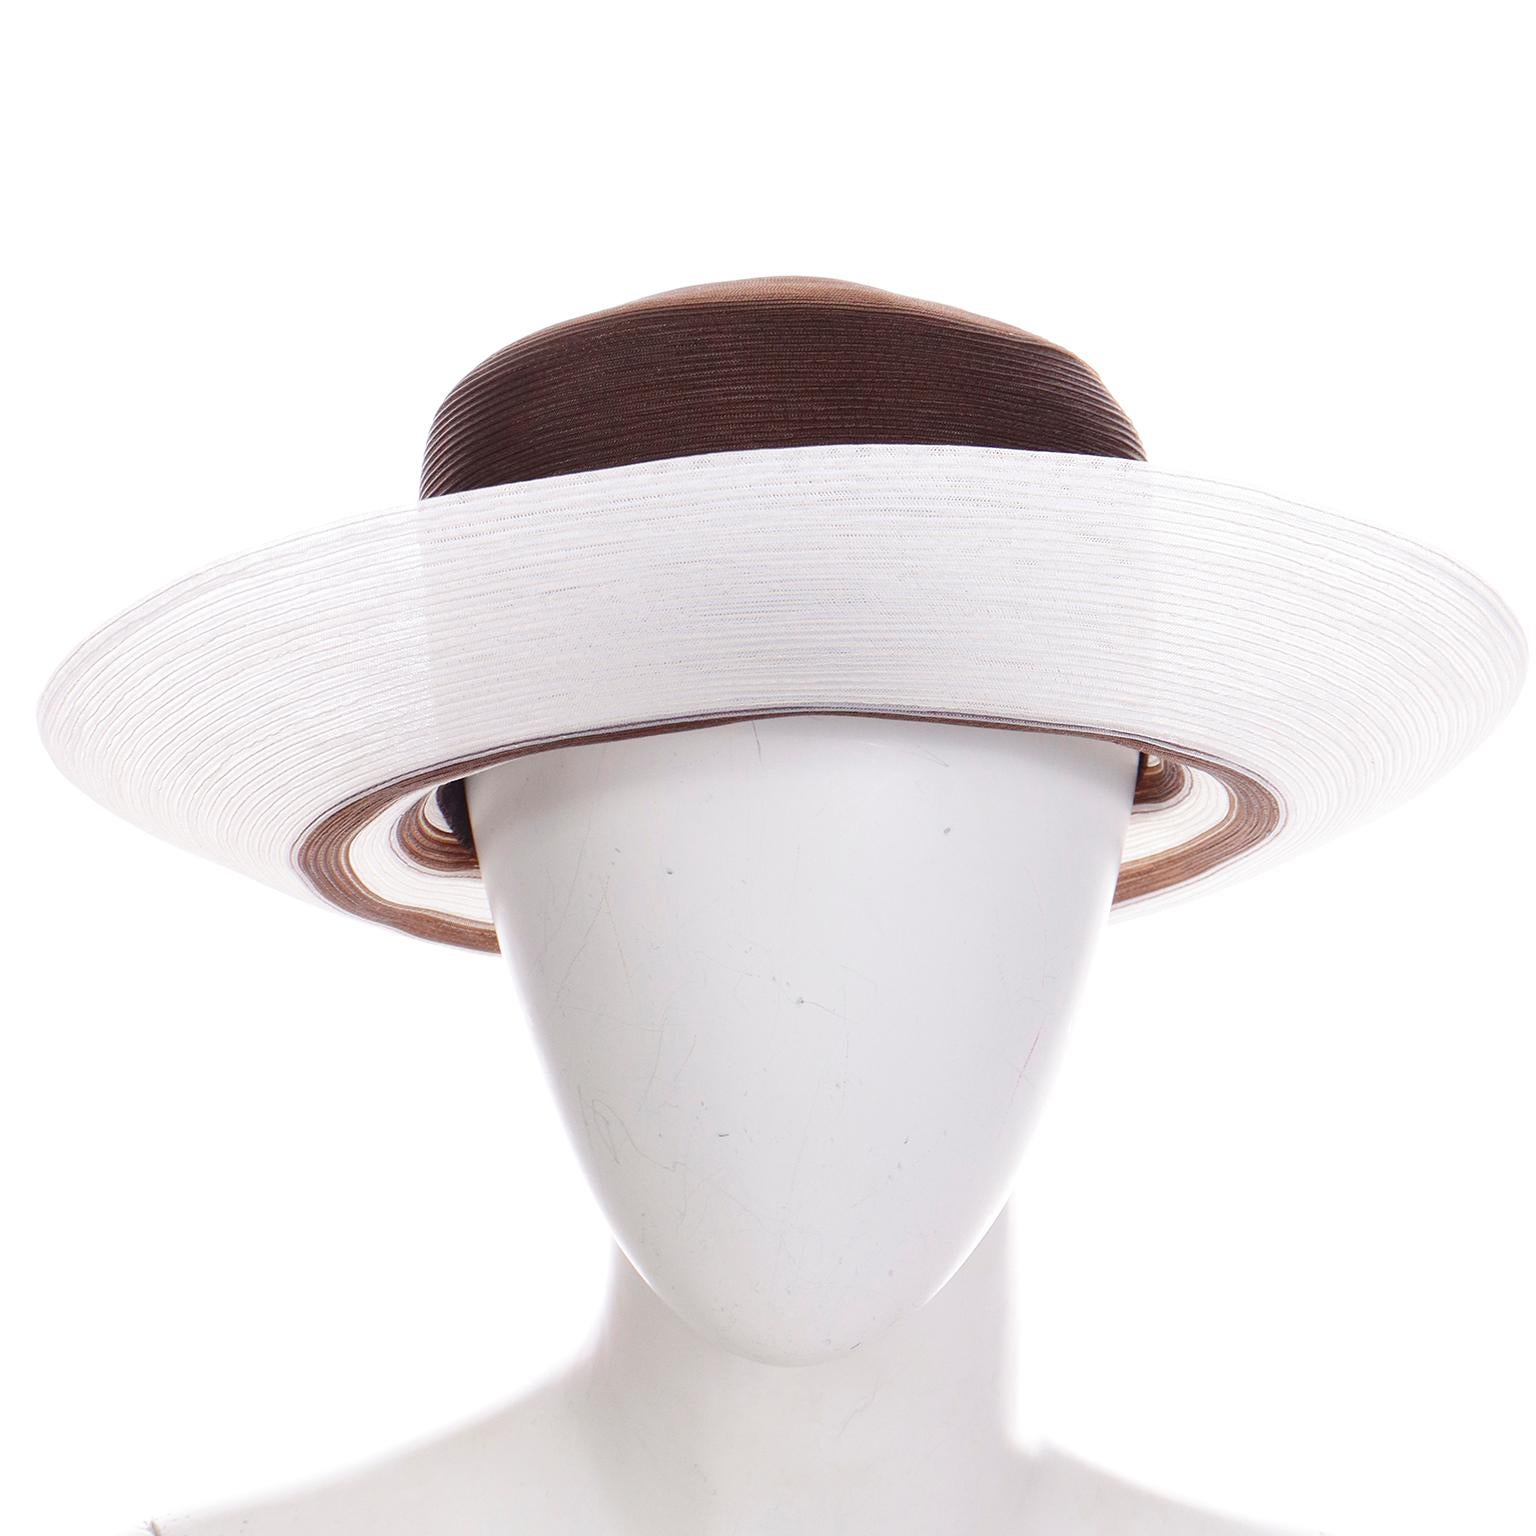 We love vintage Patricia Underwood hats and this one is really fun and easy to wear. The crown of the hat is brown and the brim is white with brown stripes. The hat is made of a coated mesh and is a perfect hat to add to your summer wardrobe!